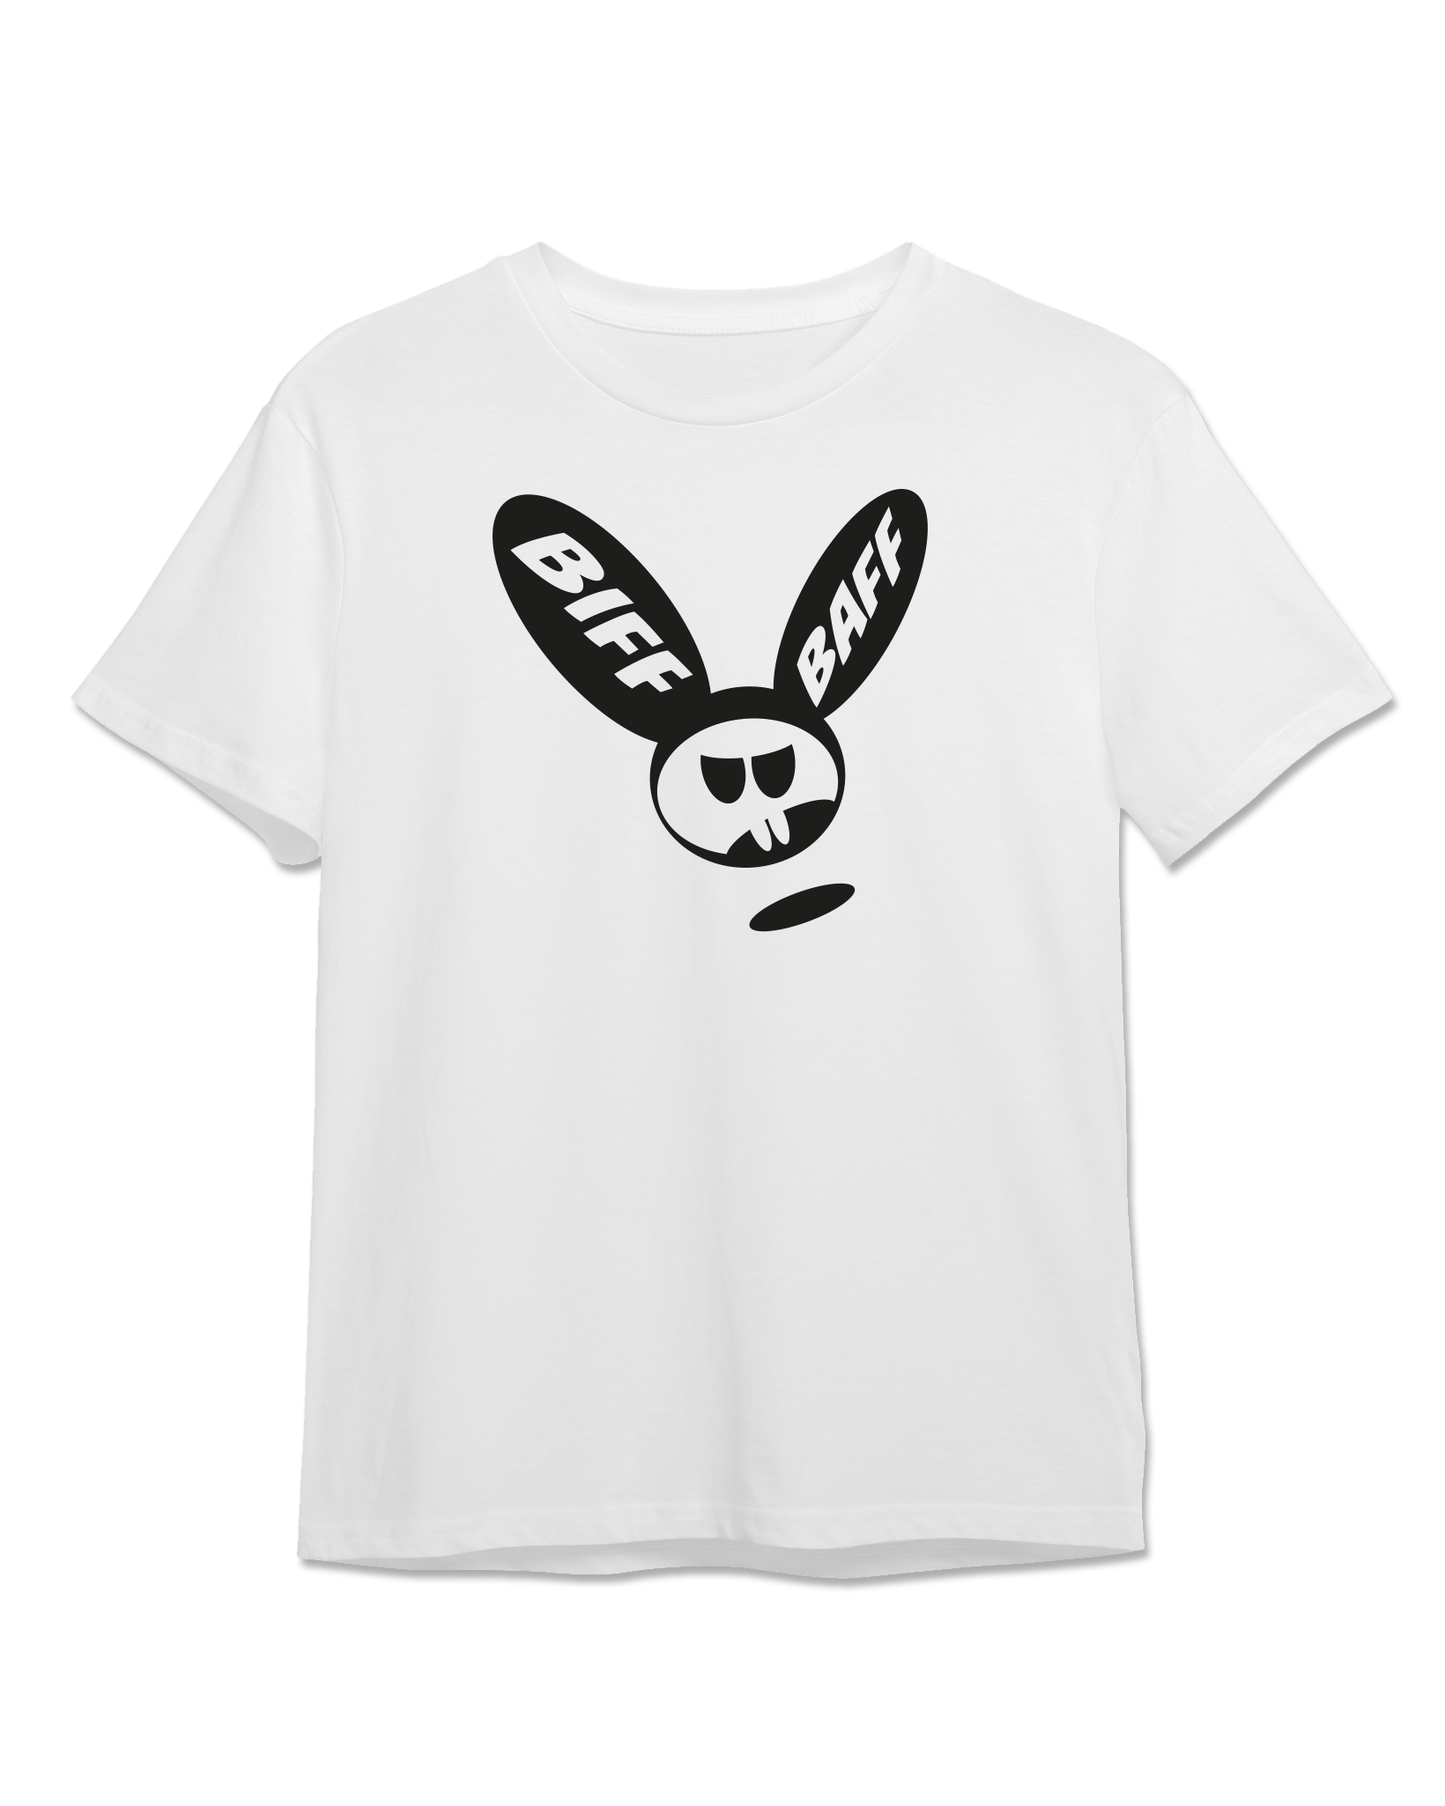 T-SHIRT "ANGRY RABBIT" W